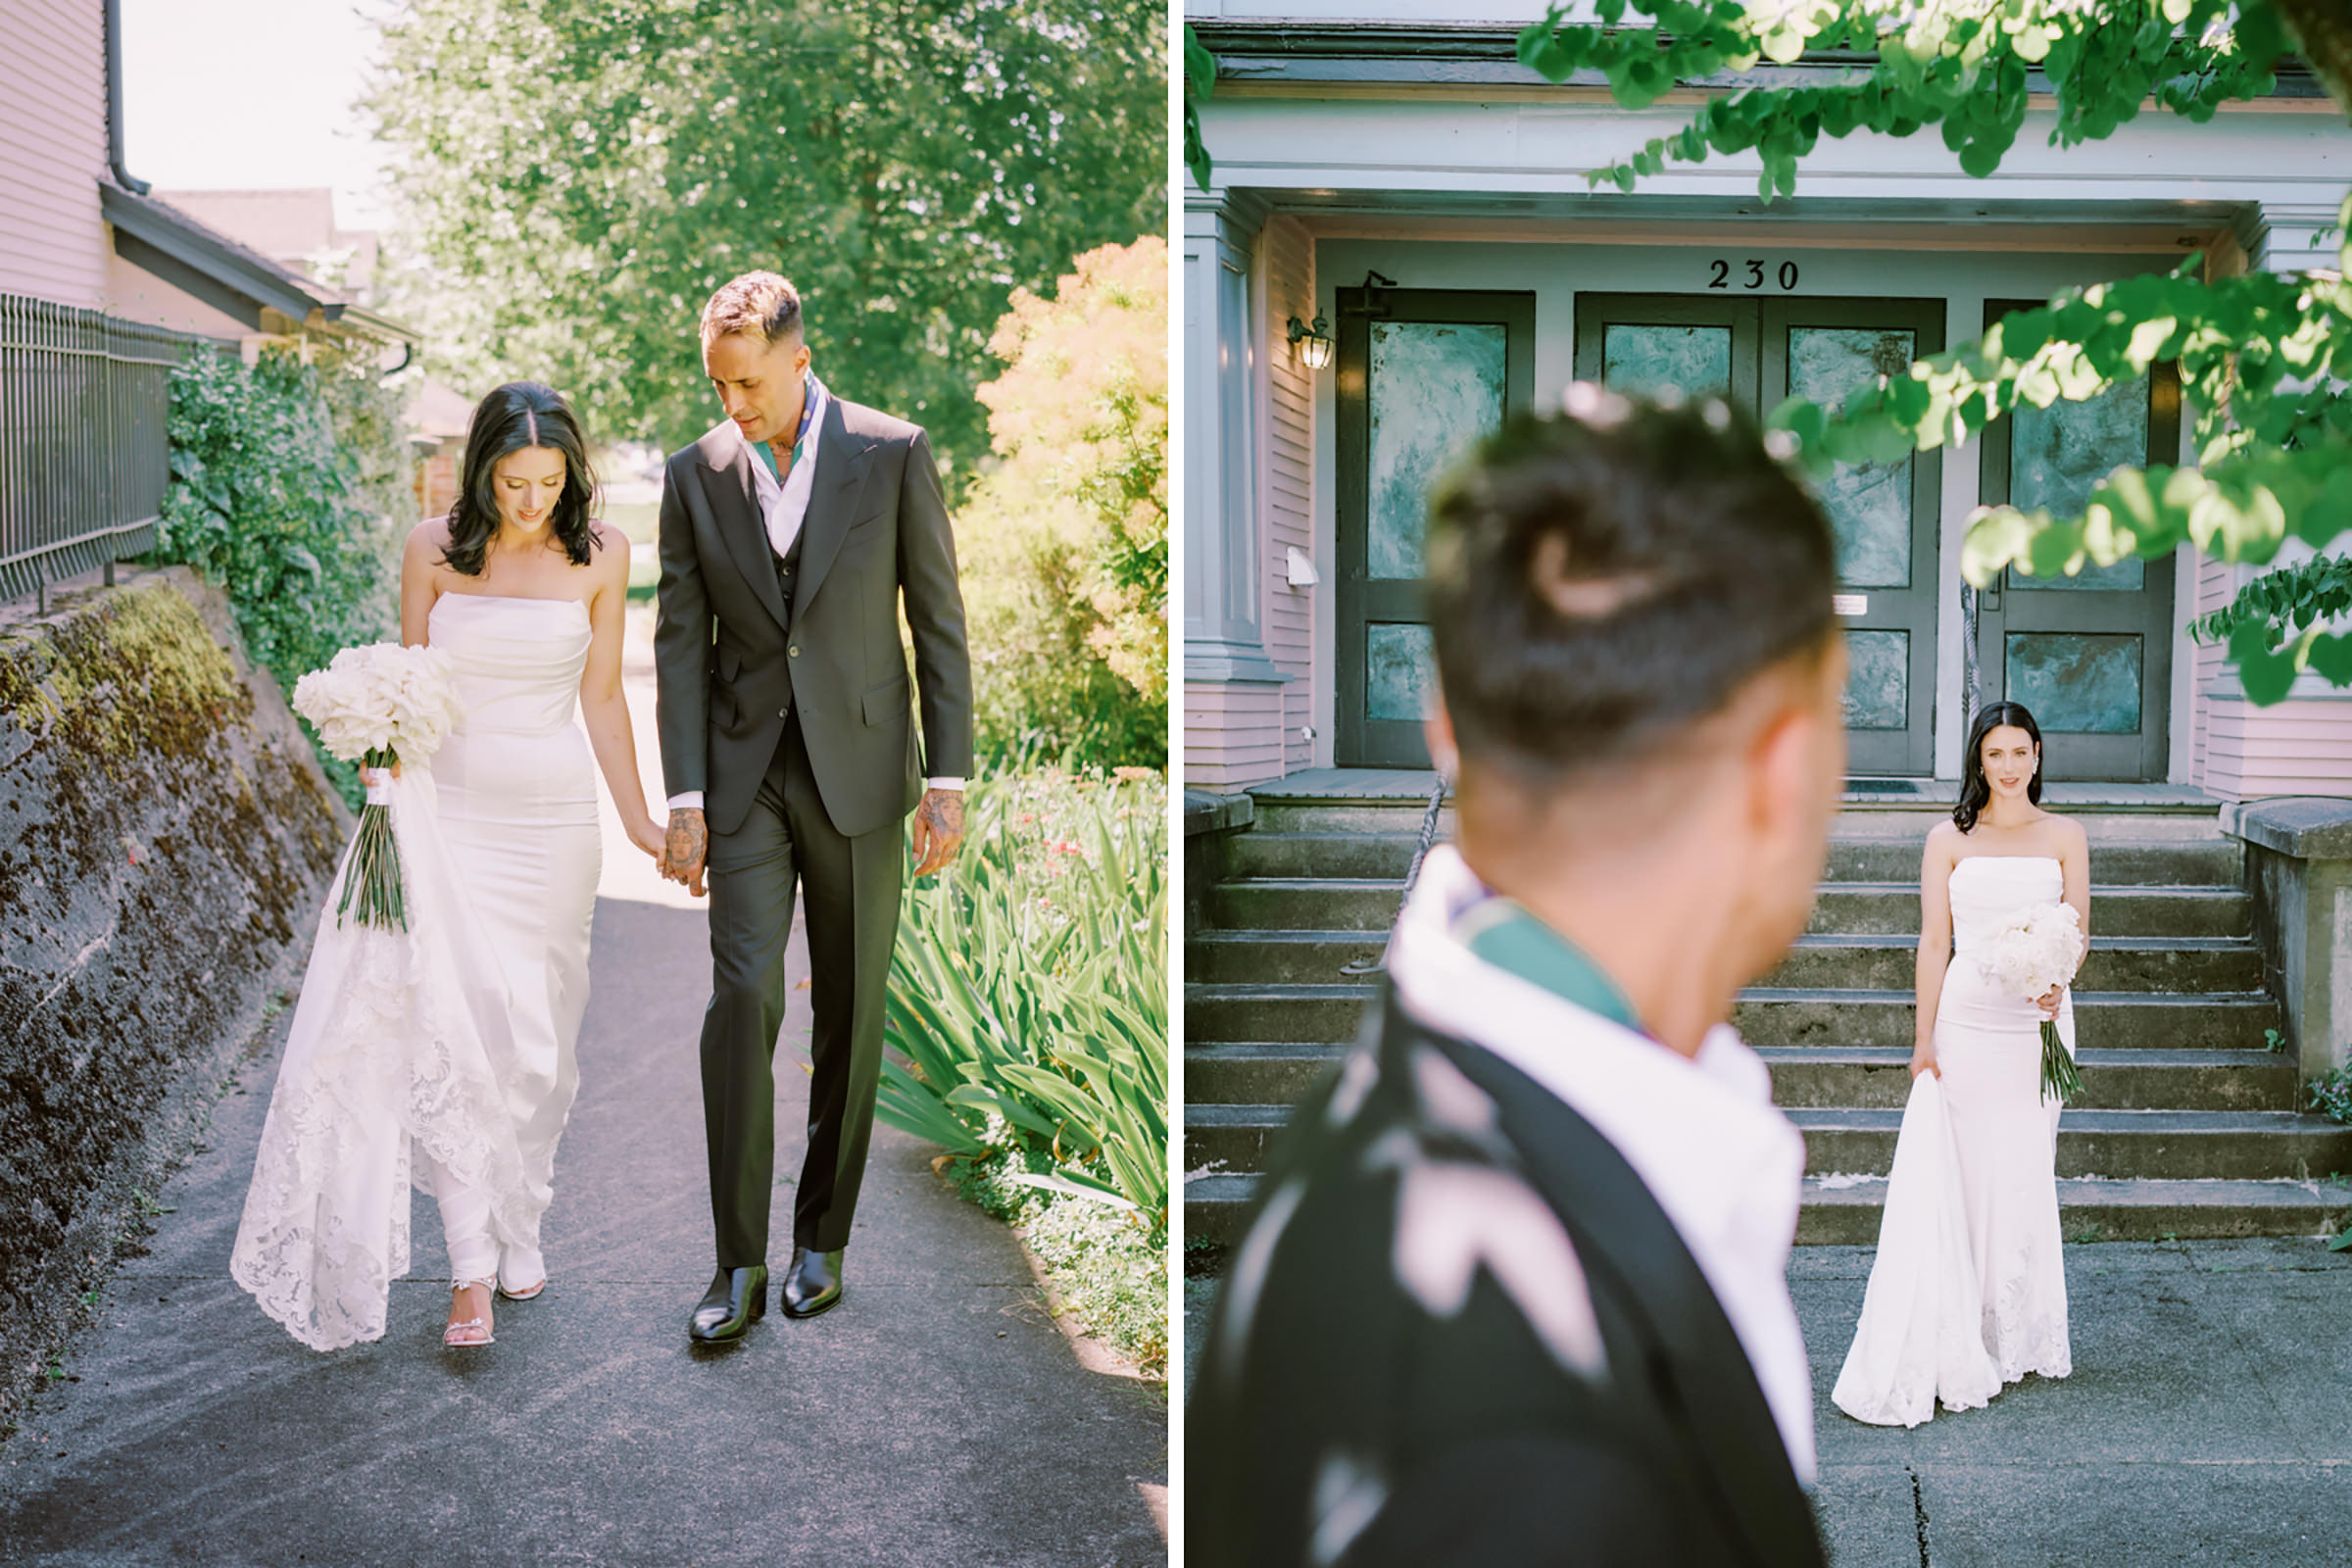 Alexa and Peter's wedding portraits by Belle Chapel at Snohomish, WA